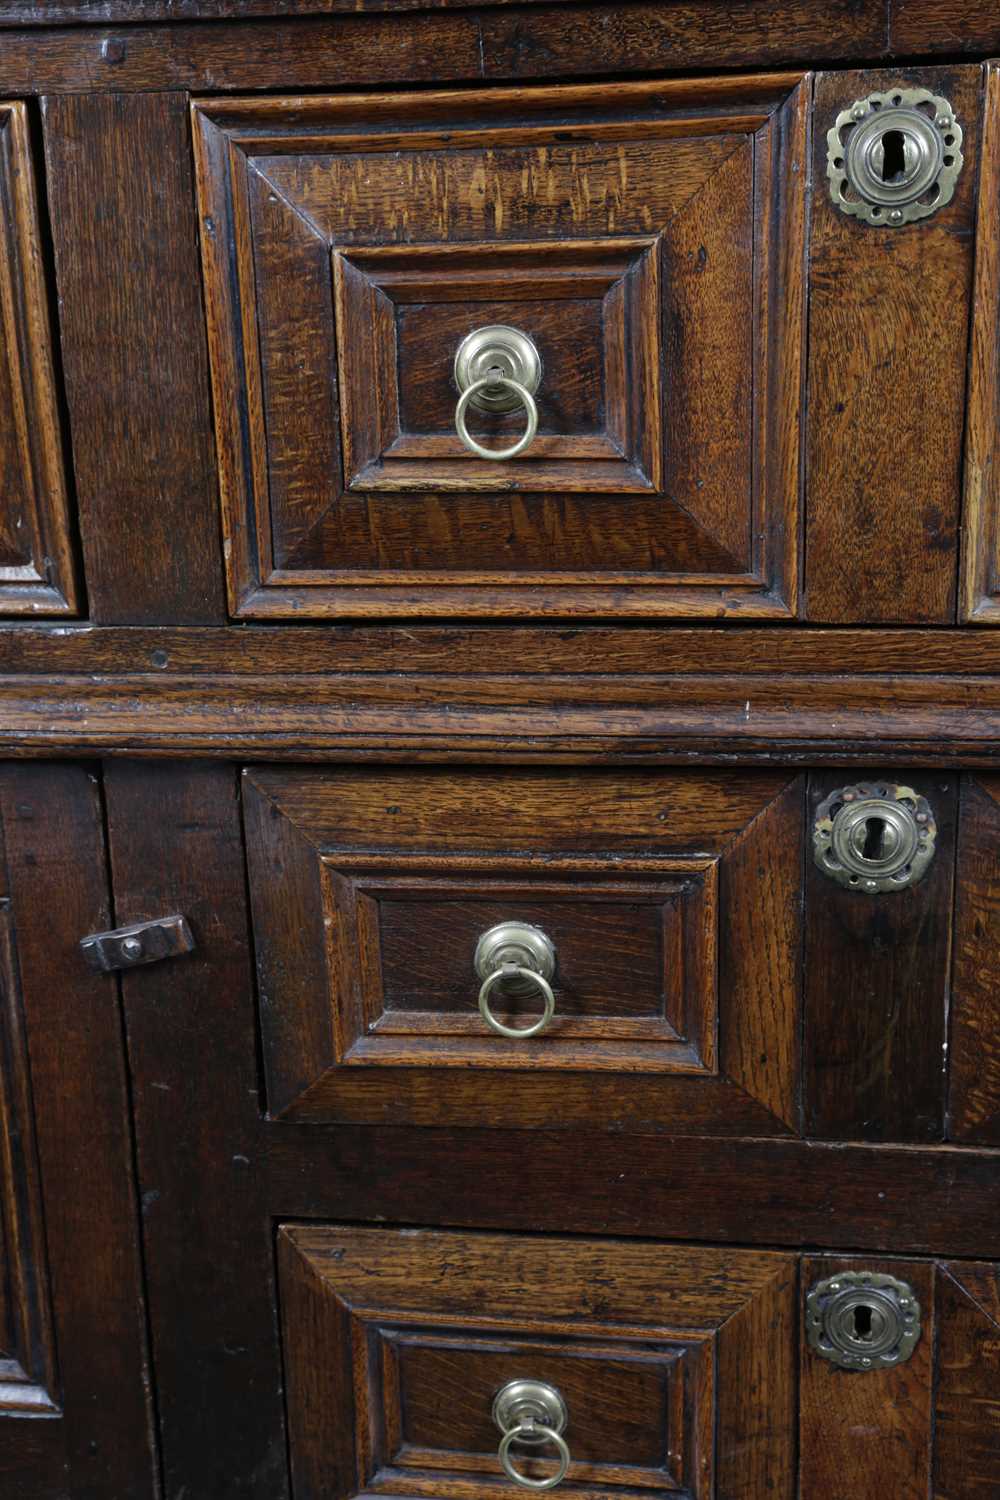 A CHARLES II OAK DRESSER LATE 17TH CENTURY the top with a moulded edge above a 'T' arrangement of - Image 3 of 3